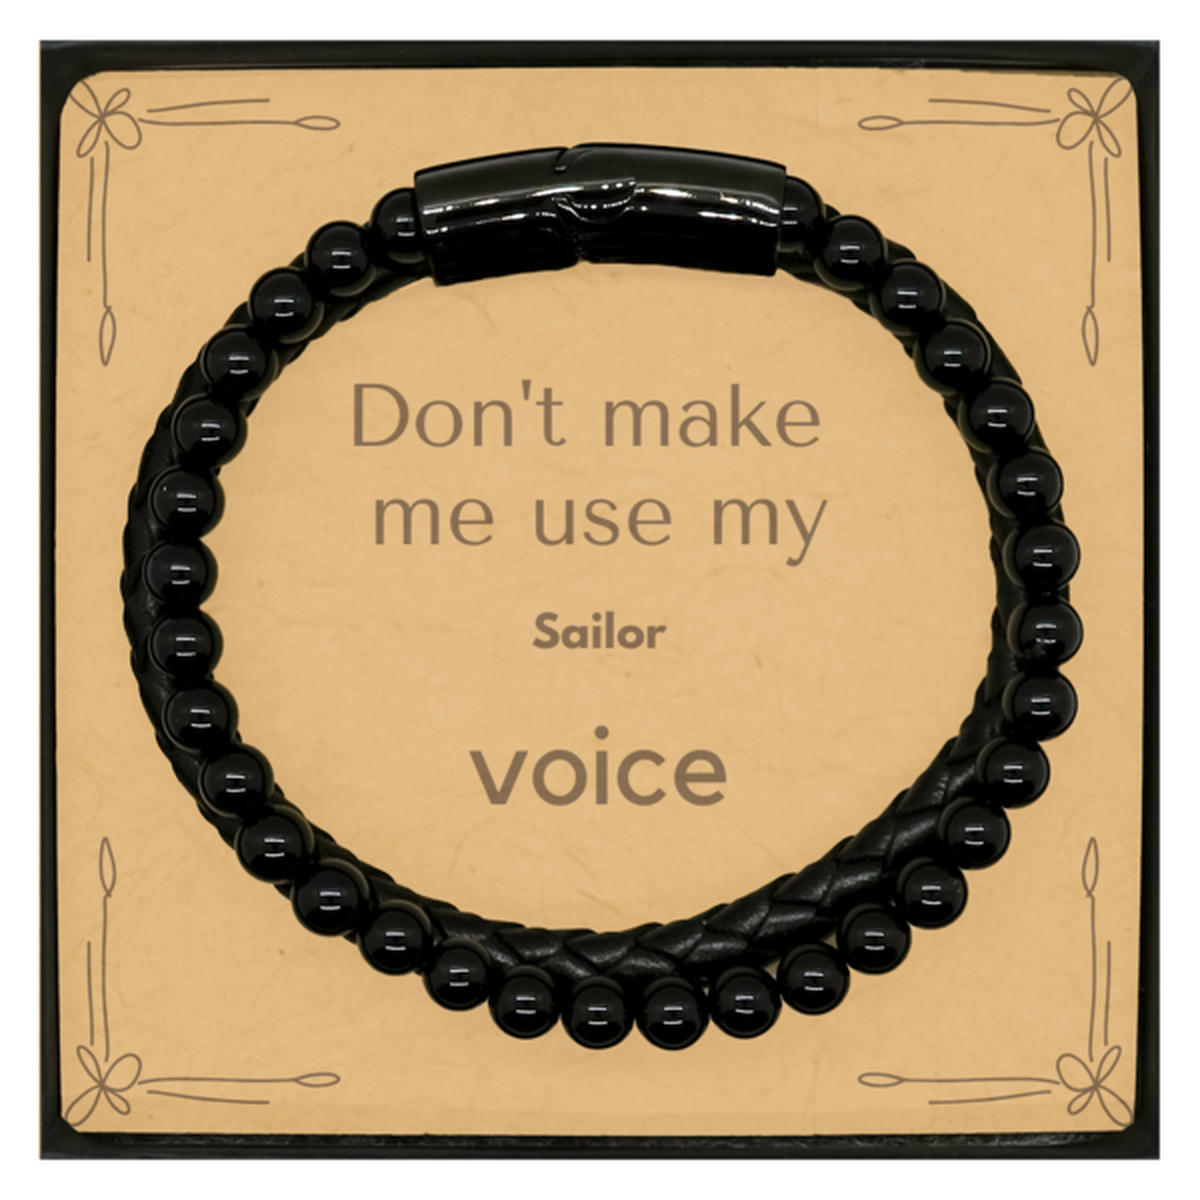 Don't make me use my Sailor voice, Sarcasm Sailor Card Gifts, Christmas Sailor Stone Leather Bracelets Birthday Unique Gifts For Sailor Coworkers, Men, Women, Colleague, Friends